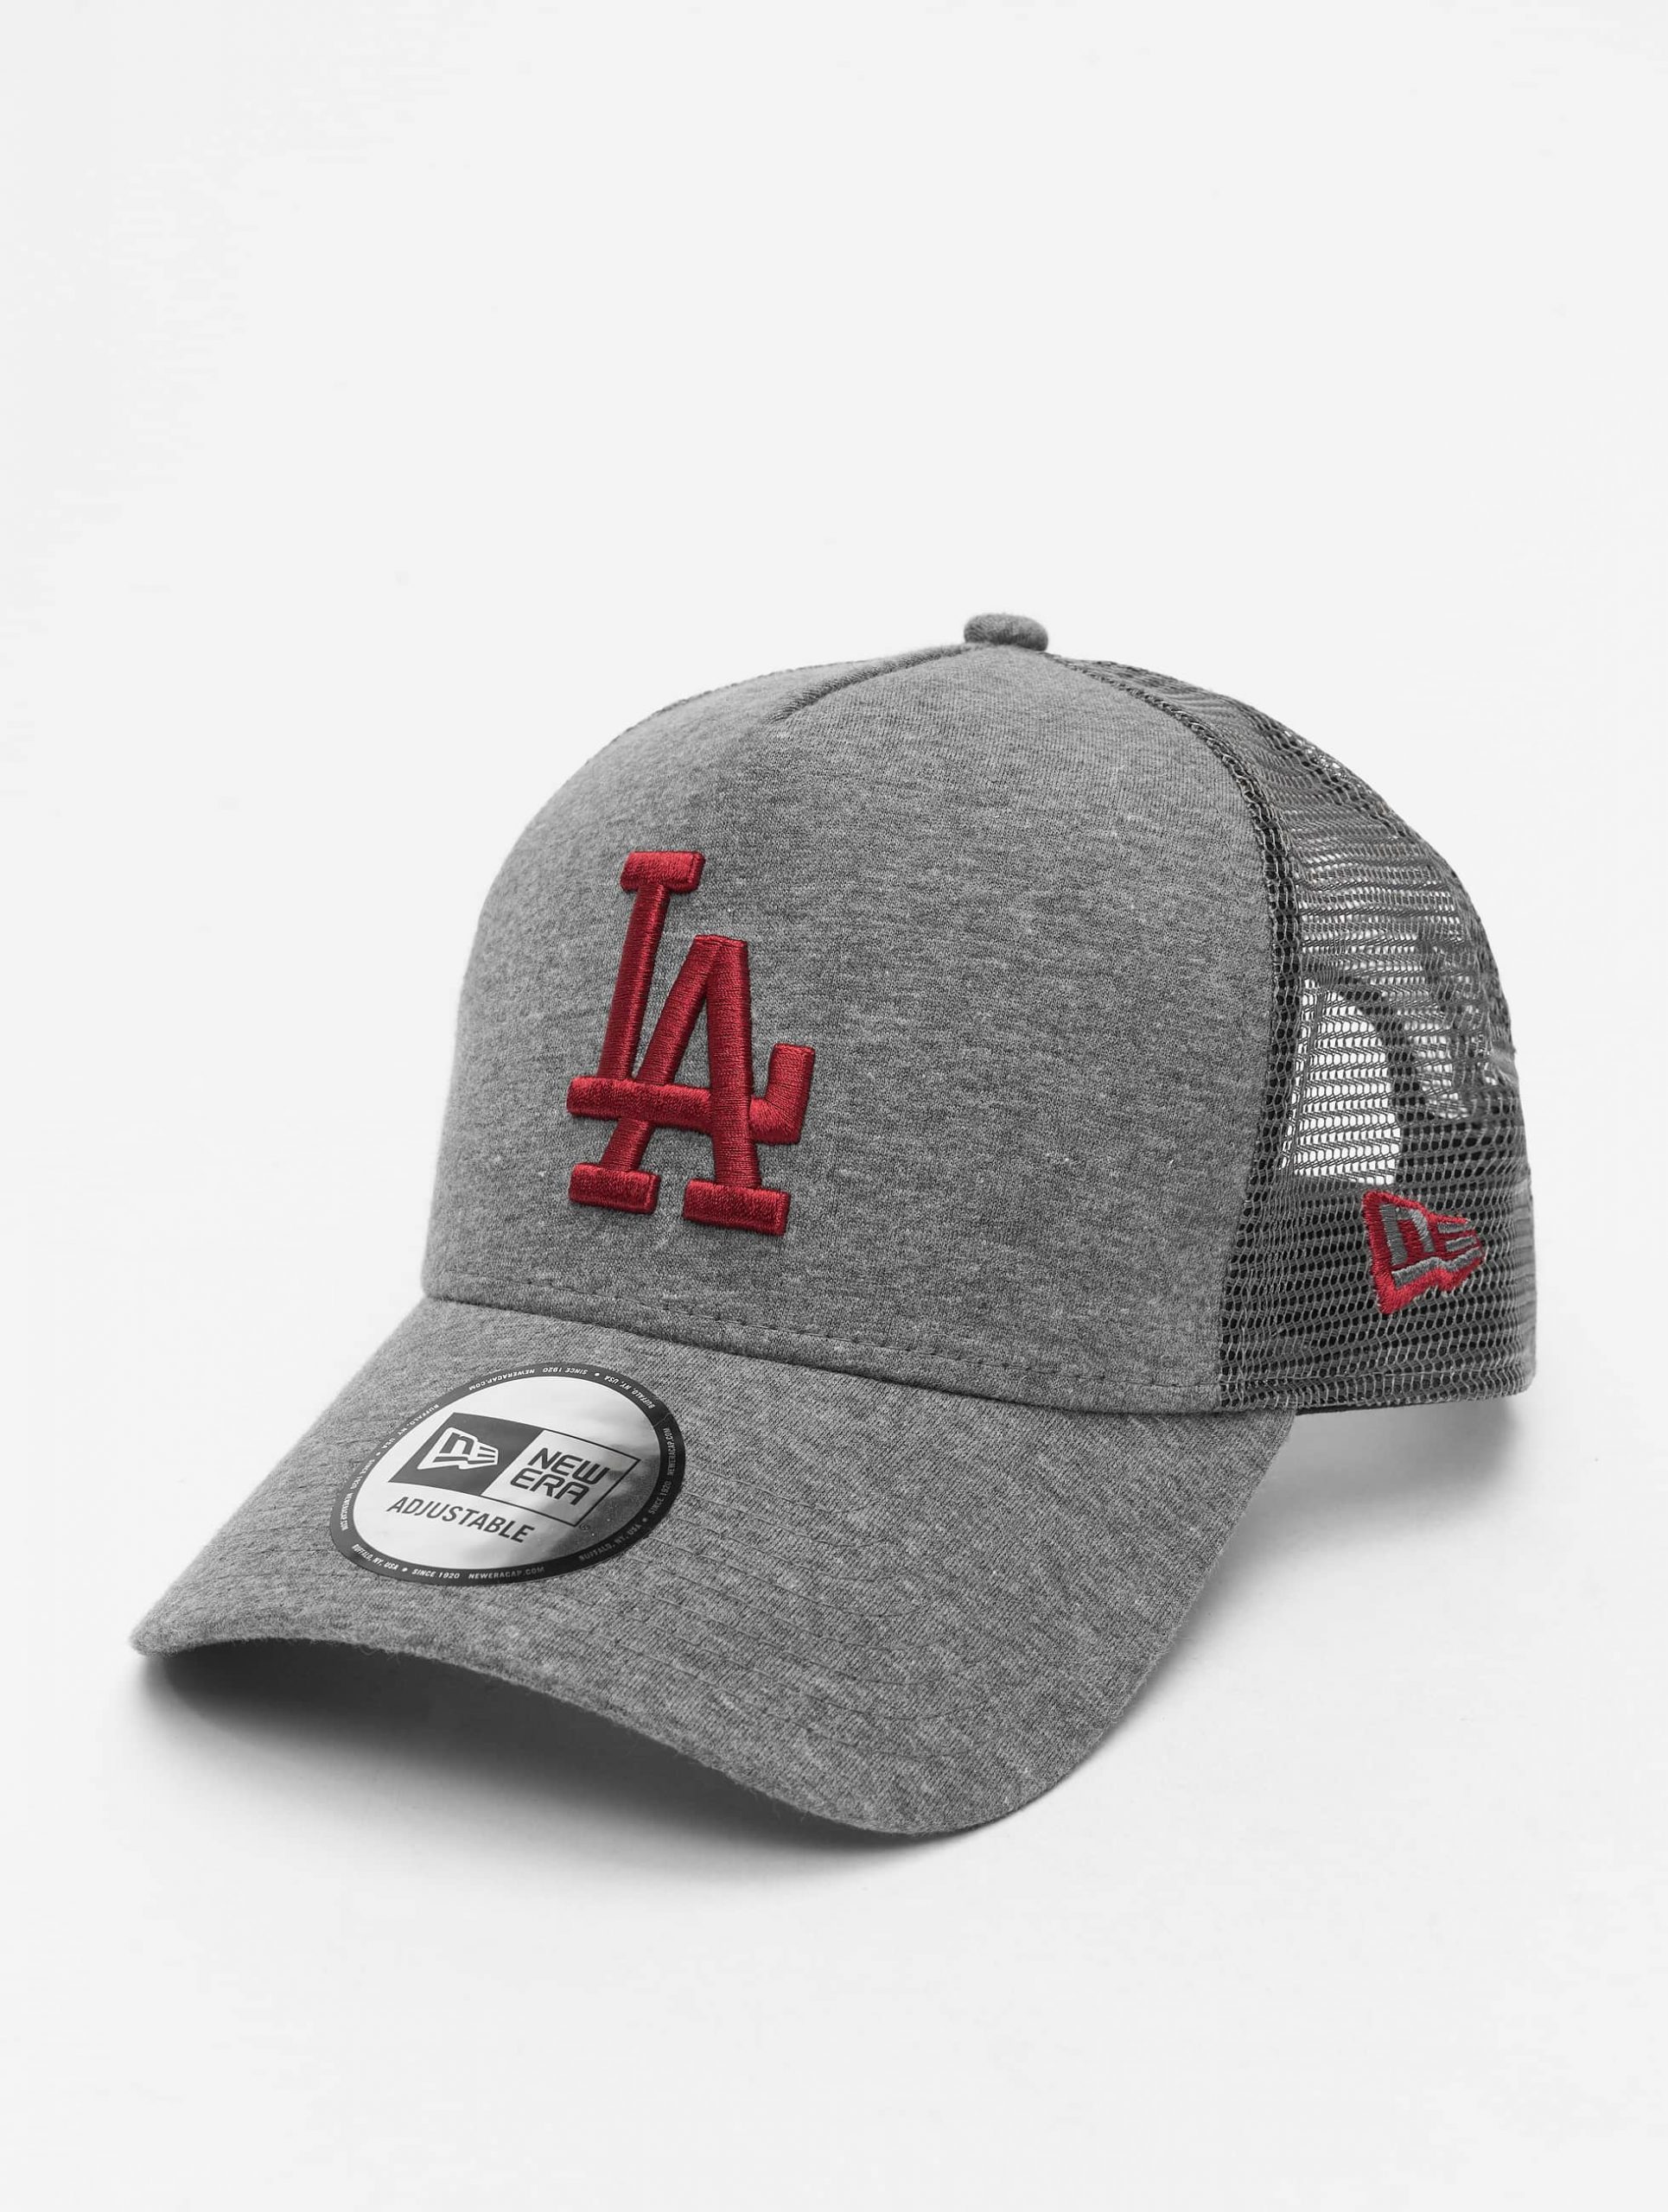 LOS ANGELES DODGERS JERSEY ESSENTIAL GREY A-FRAME TRUCKER